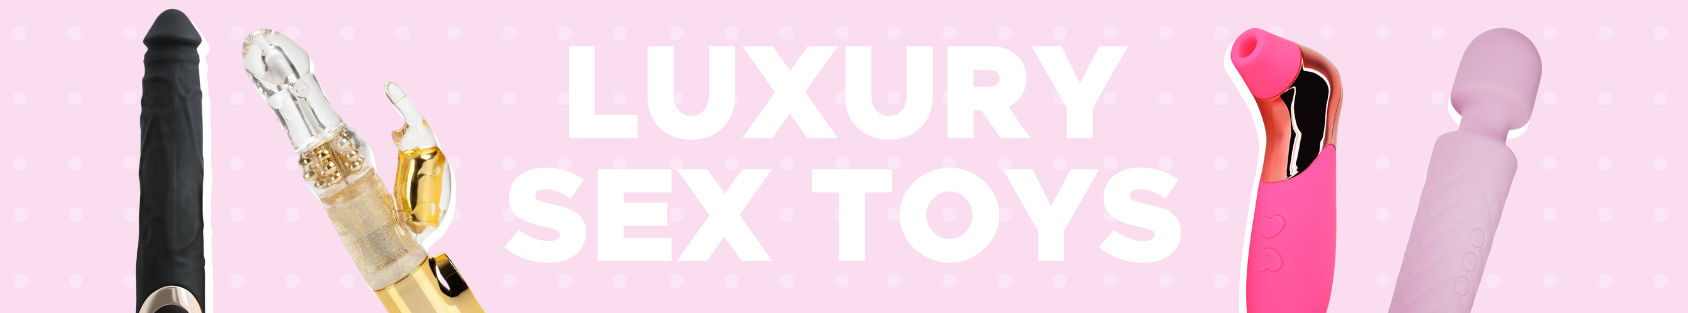 Banner for our luxury vibrators collection. Banner reads: Luxury vibrators. Shop our selection of luxury sex toys today. 100% discreet shipping.